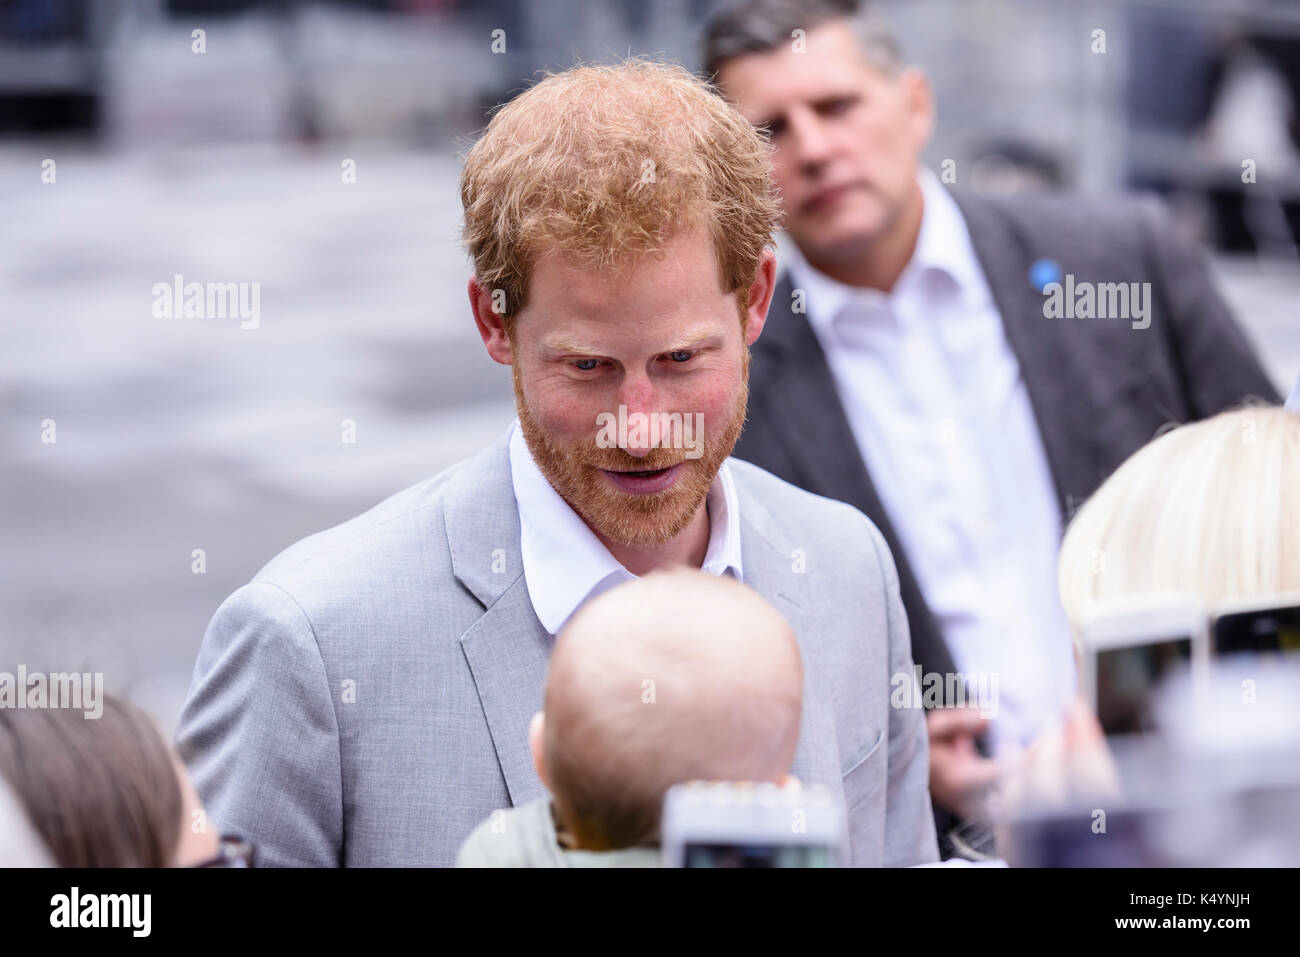 Belfast, Northern Ireland. 07/09/2017 -  Prince Harry stops to admire a baby during a walkabout in Belfast on his first Northern Ireland visit. Stock Photo